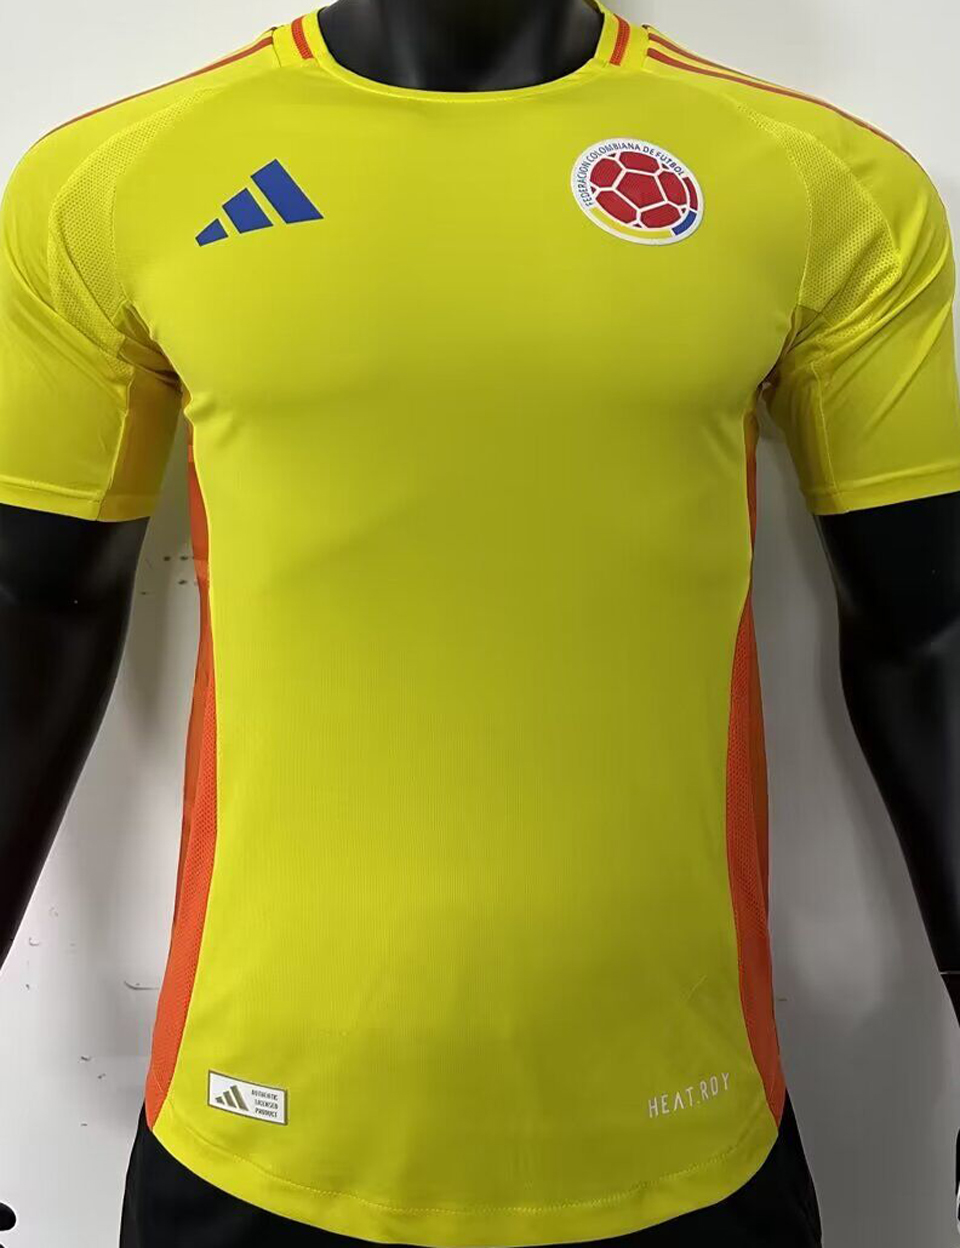 Colombia Personalized Home Soccer Country Jersey